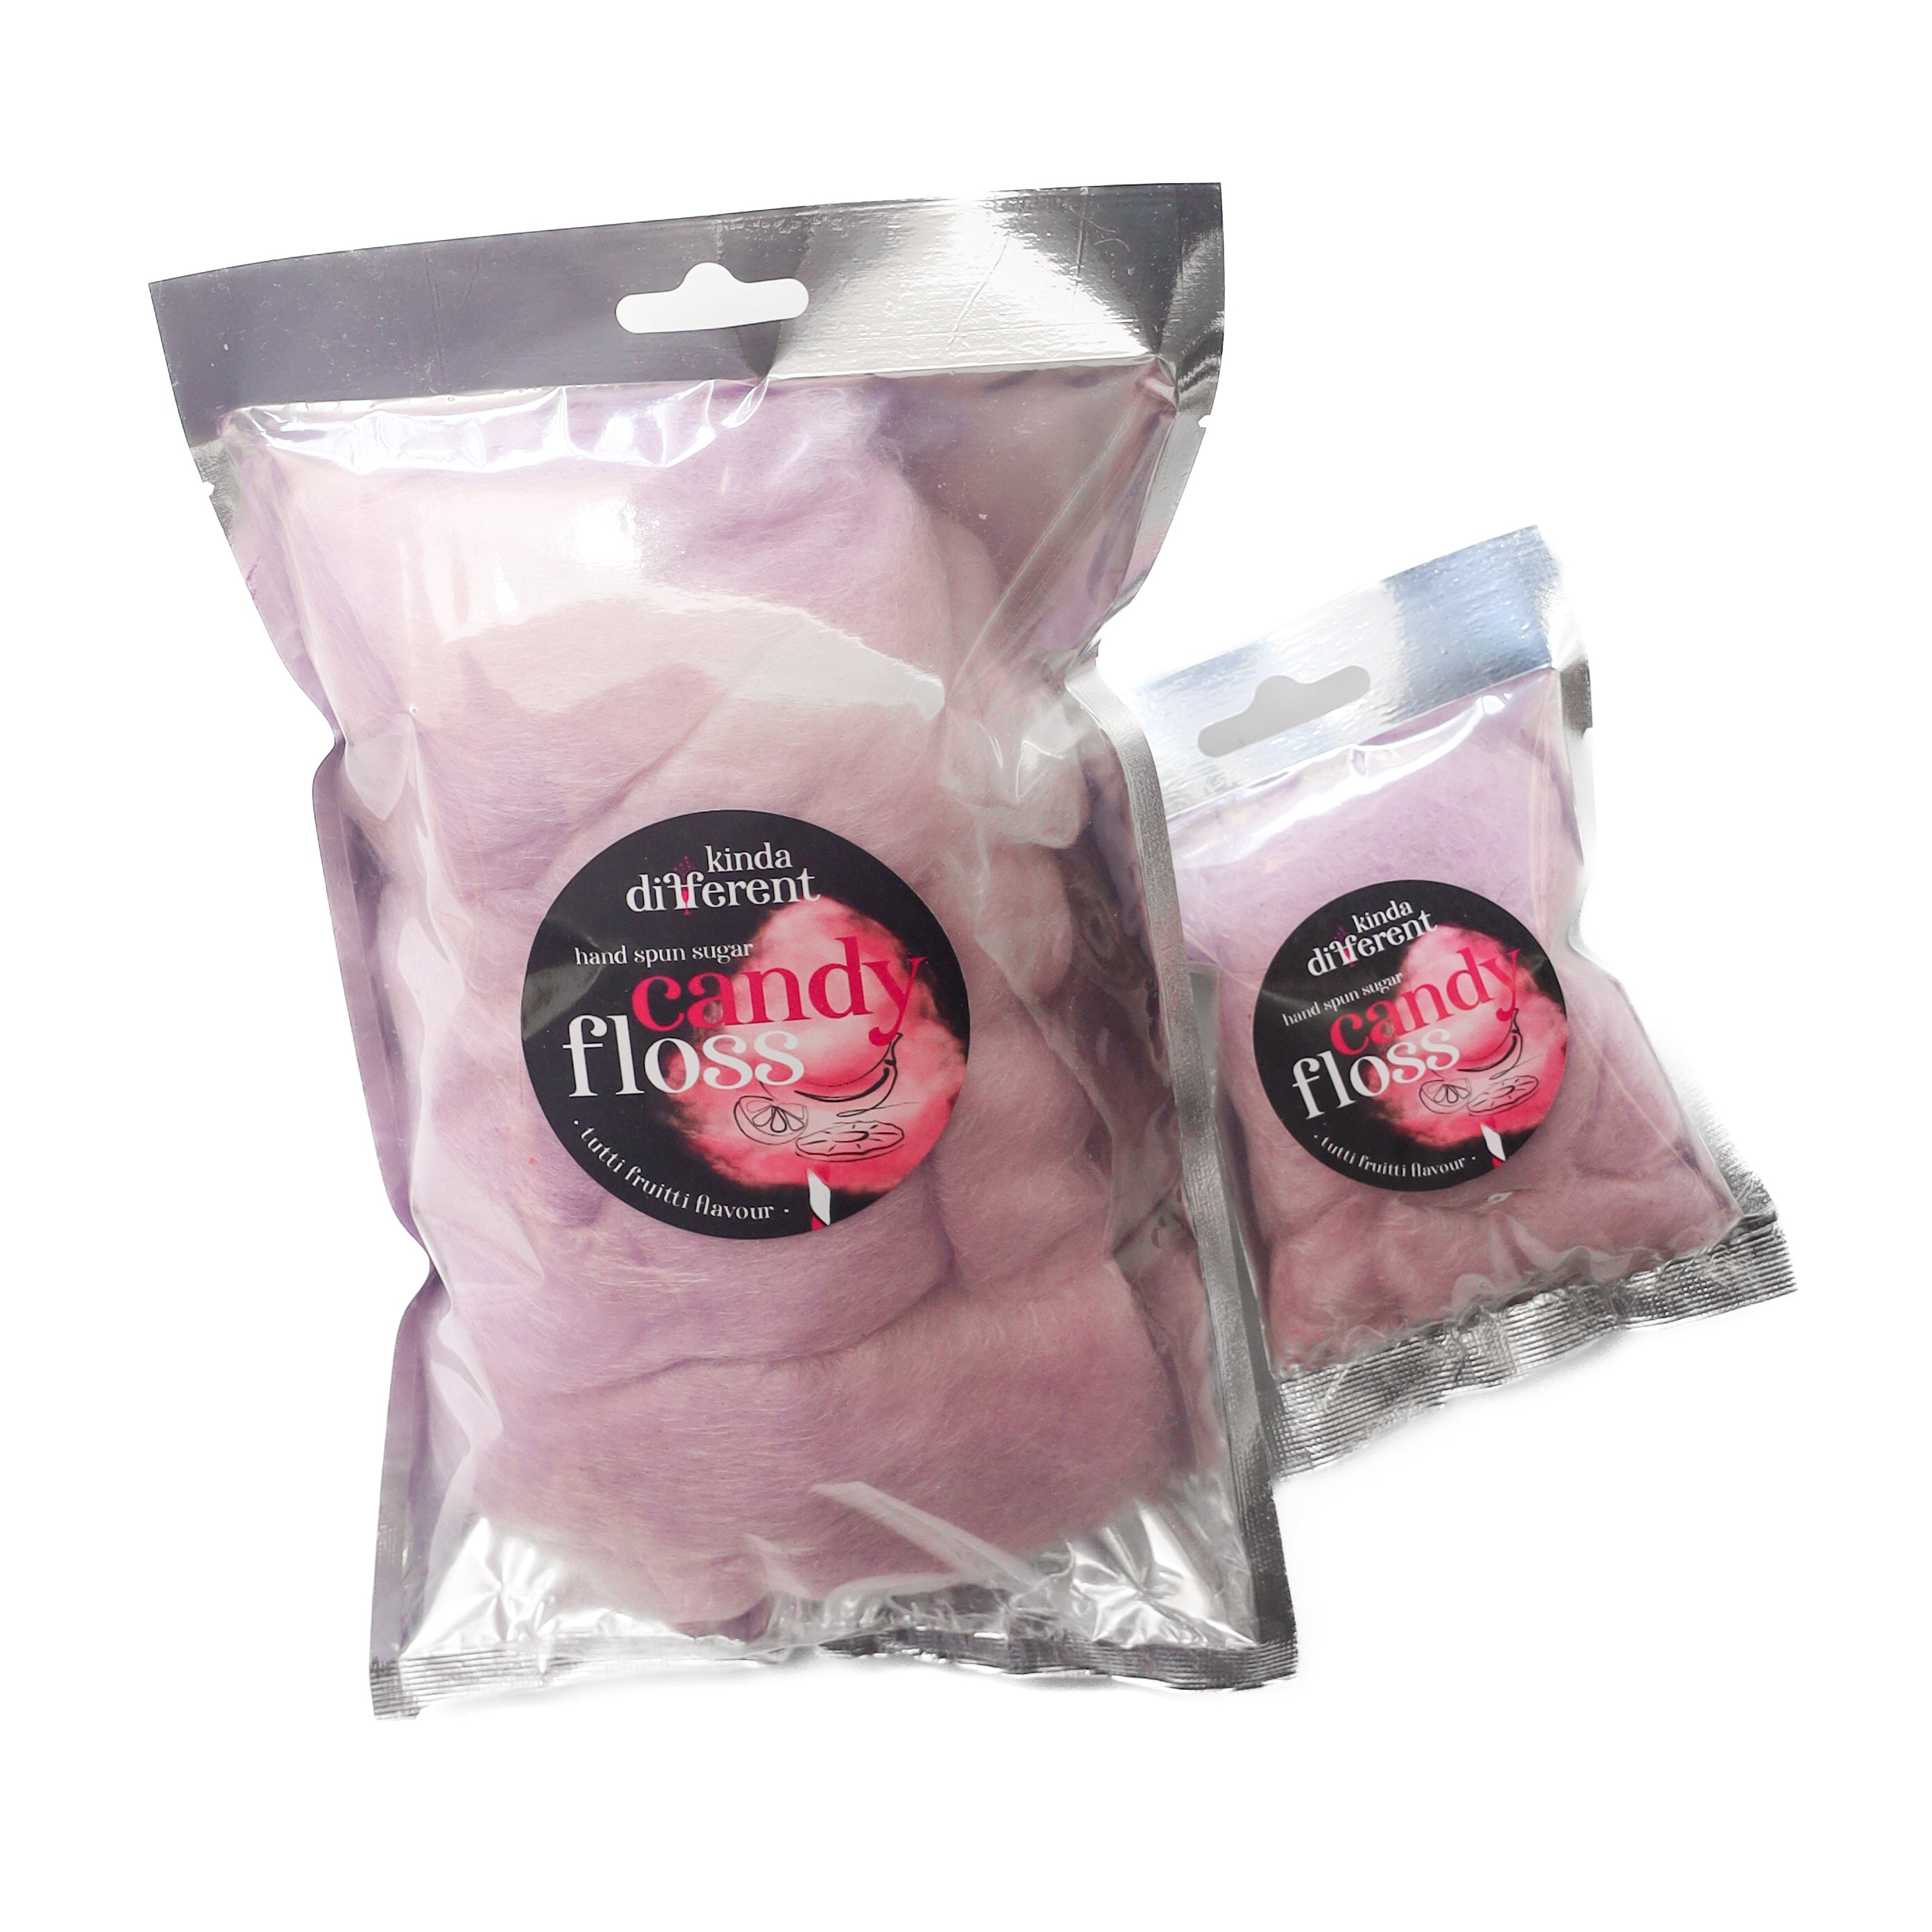 Tutti Frutti Flavoured Candy Floss (Cotton Candy)